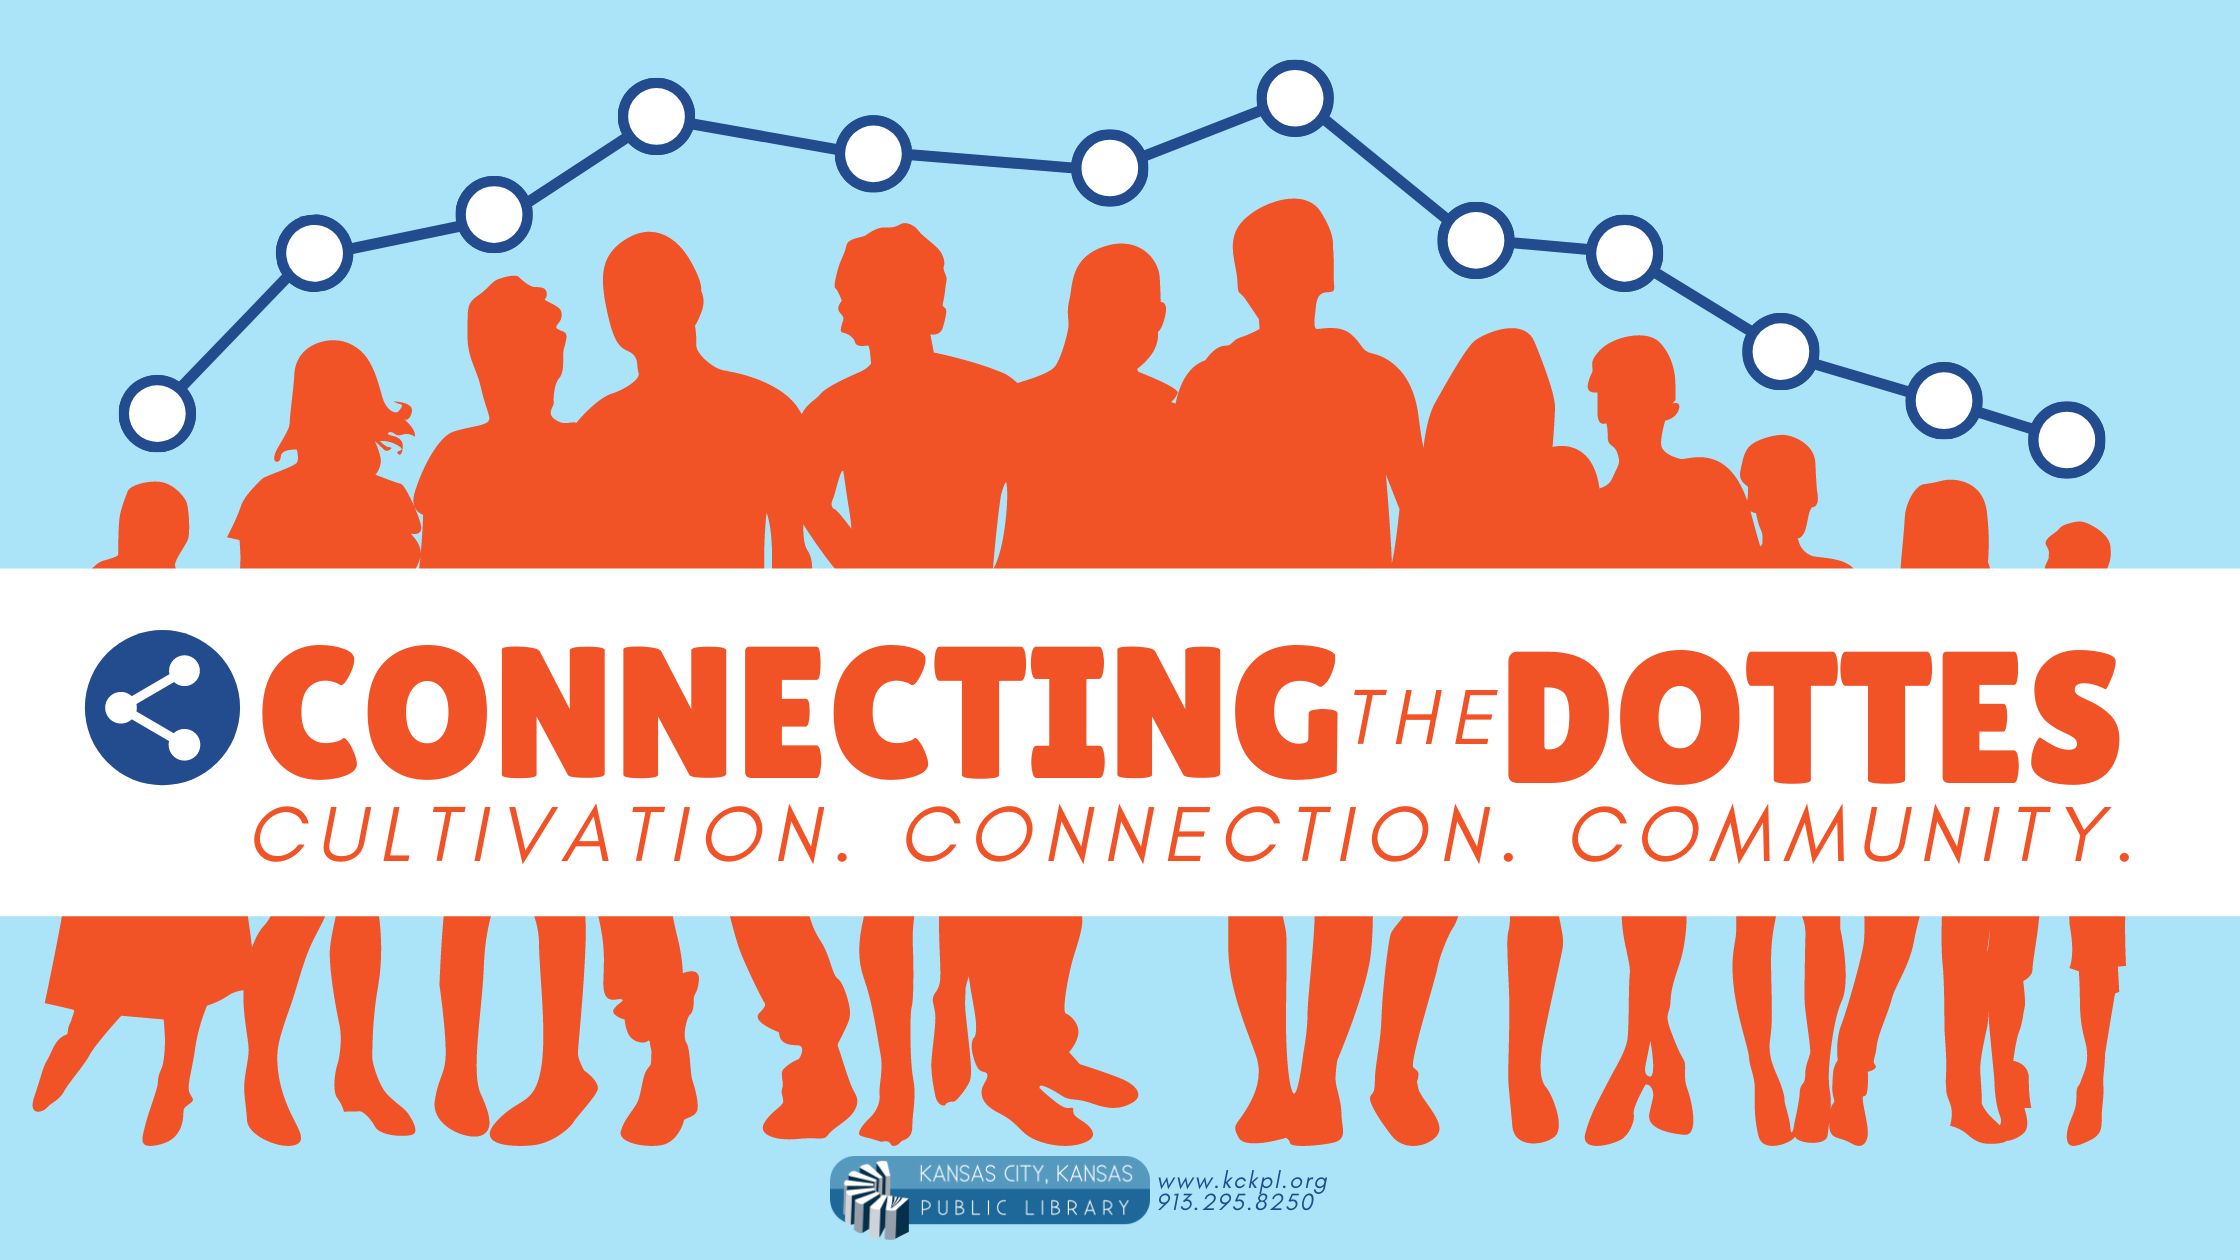 Connecting the Dottes